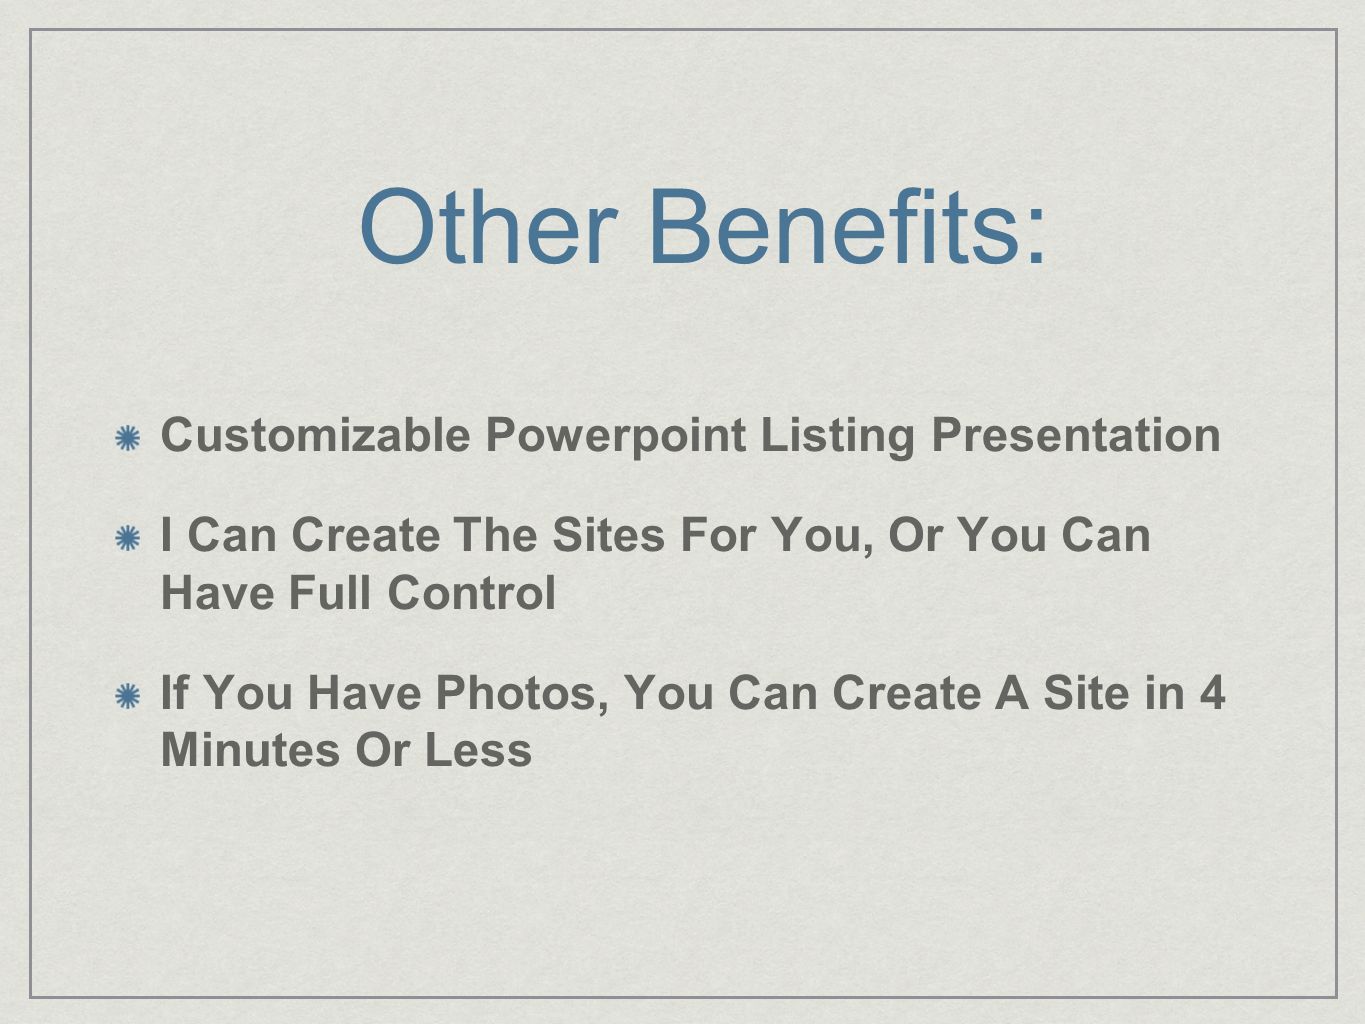 Customizable Powerpoint Listing Presentation I Can Create The Sites For You, Or You Can Have Full Control If You Have Photos, You Can Create A Site in 4 Minutes Or Less Other Benefits: